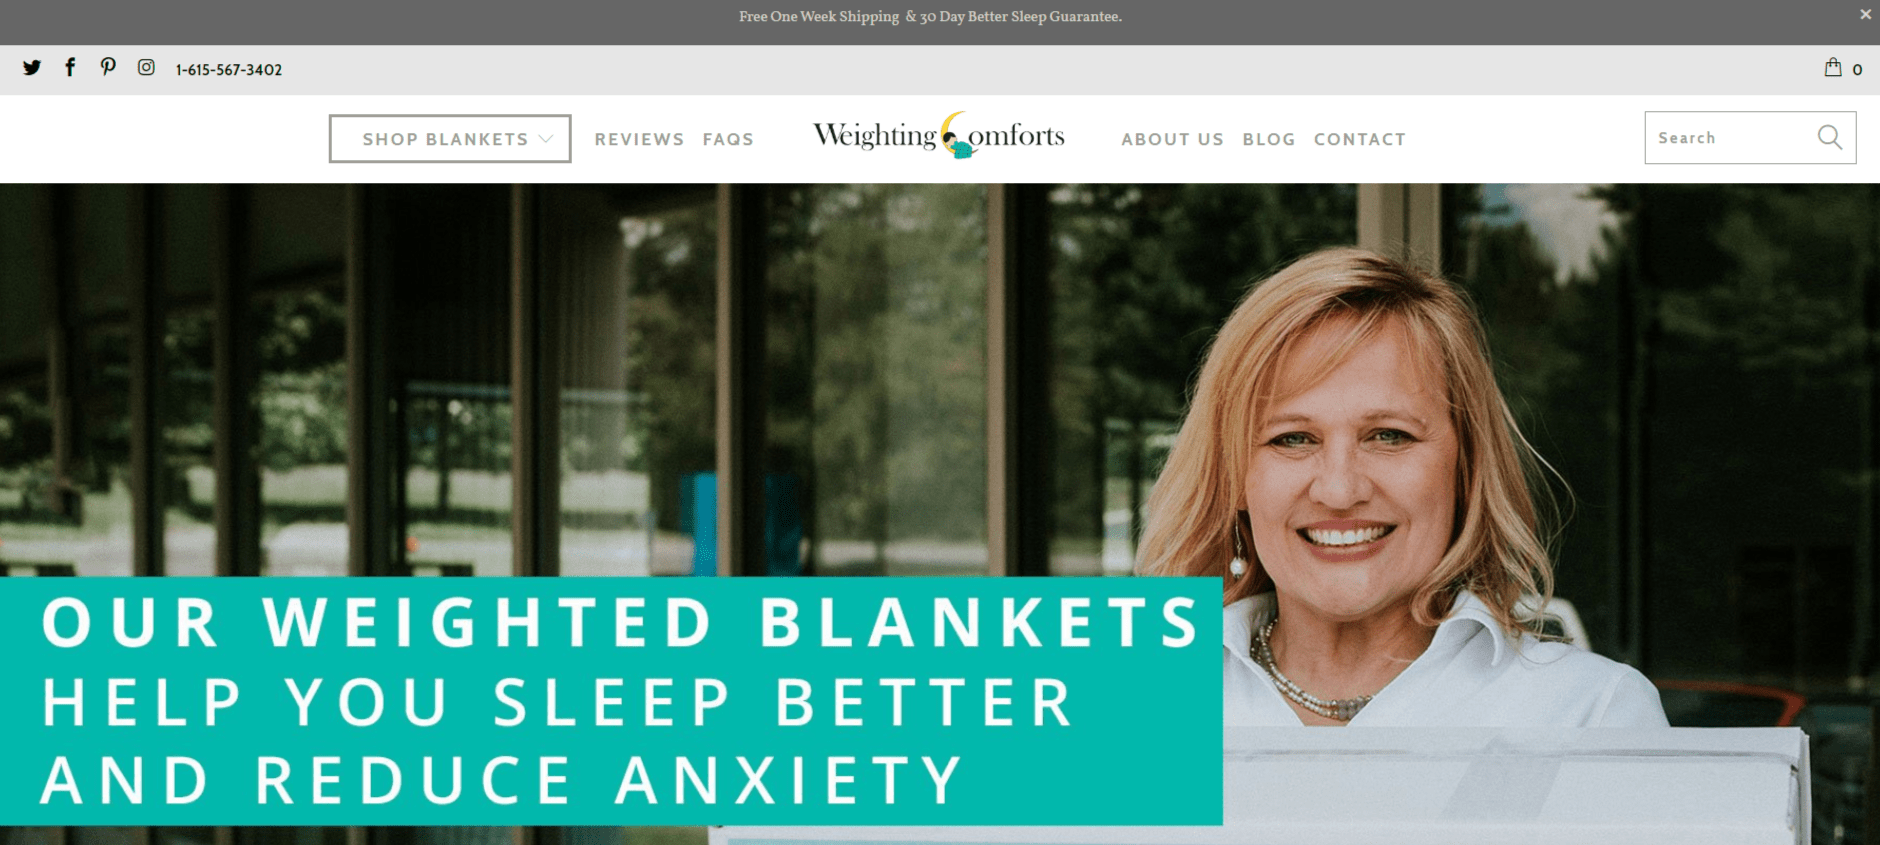 Weighting Coupon Codes- The Weighted Blankets